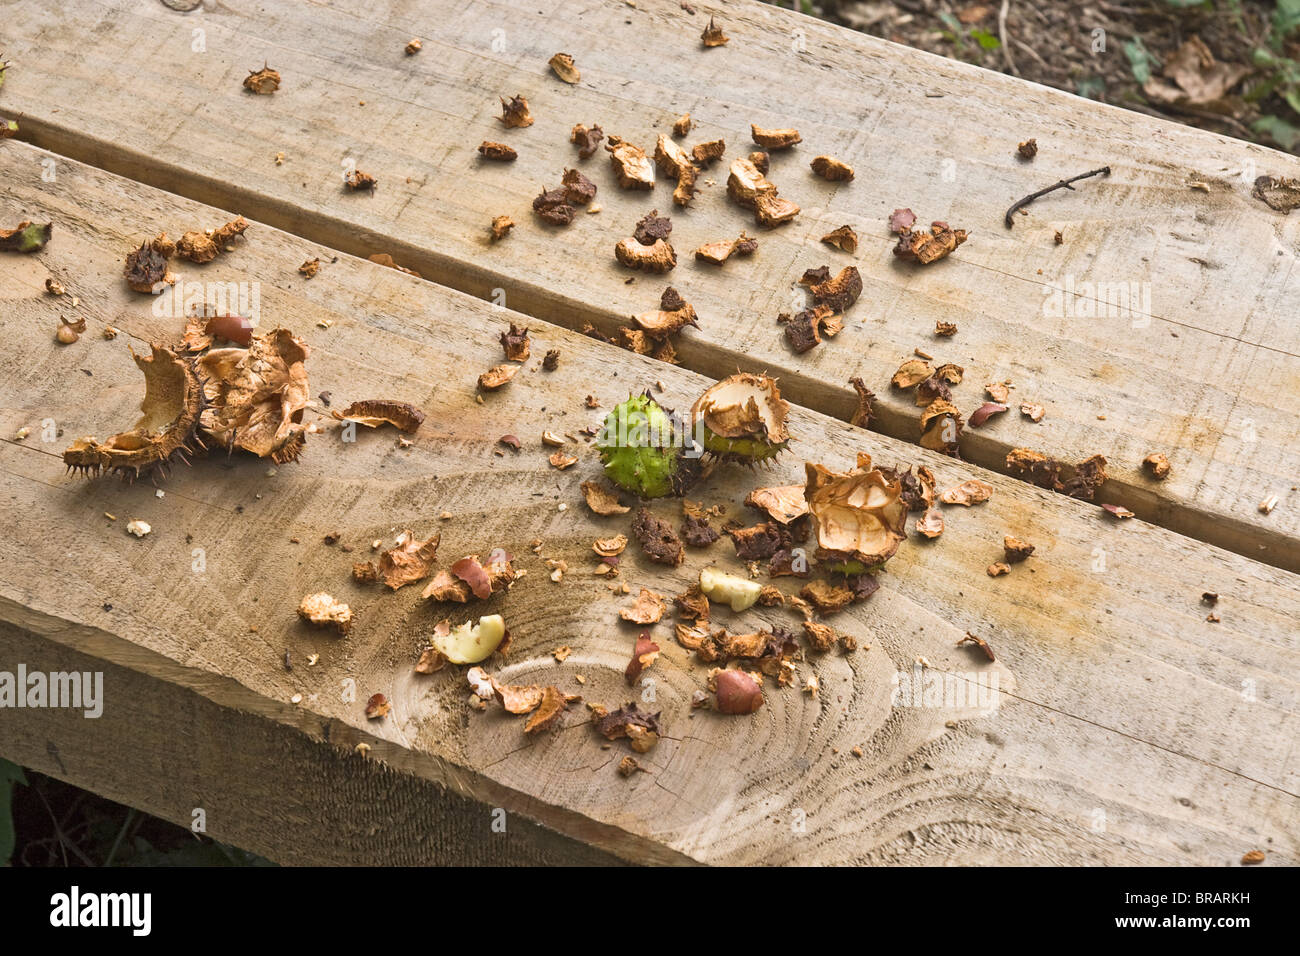 The remains of Horse chestnut conkers eaten by grey squirrels. Stock Photo